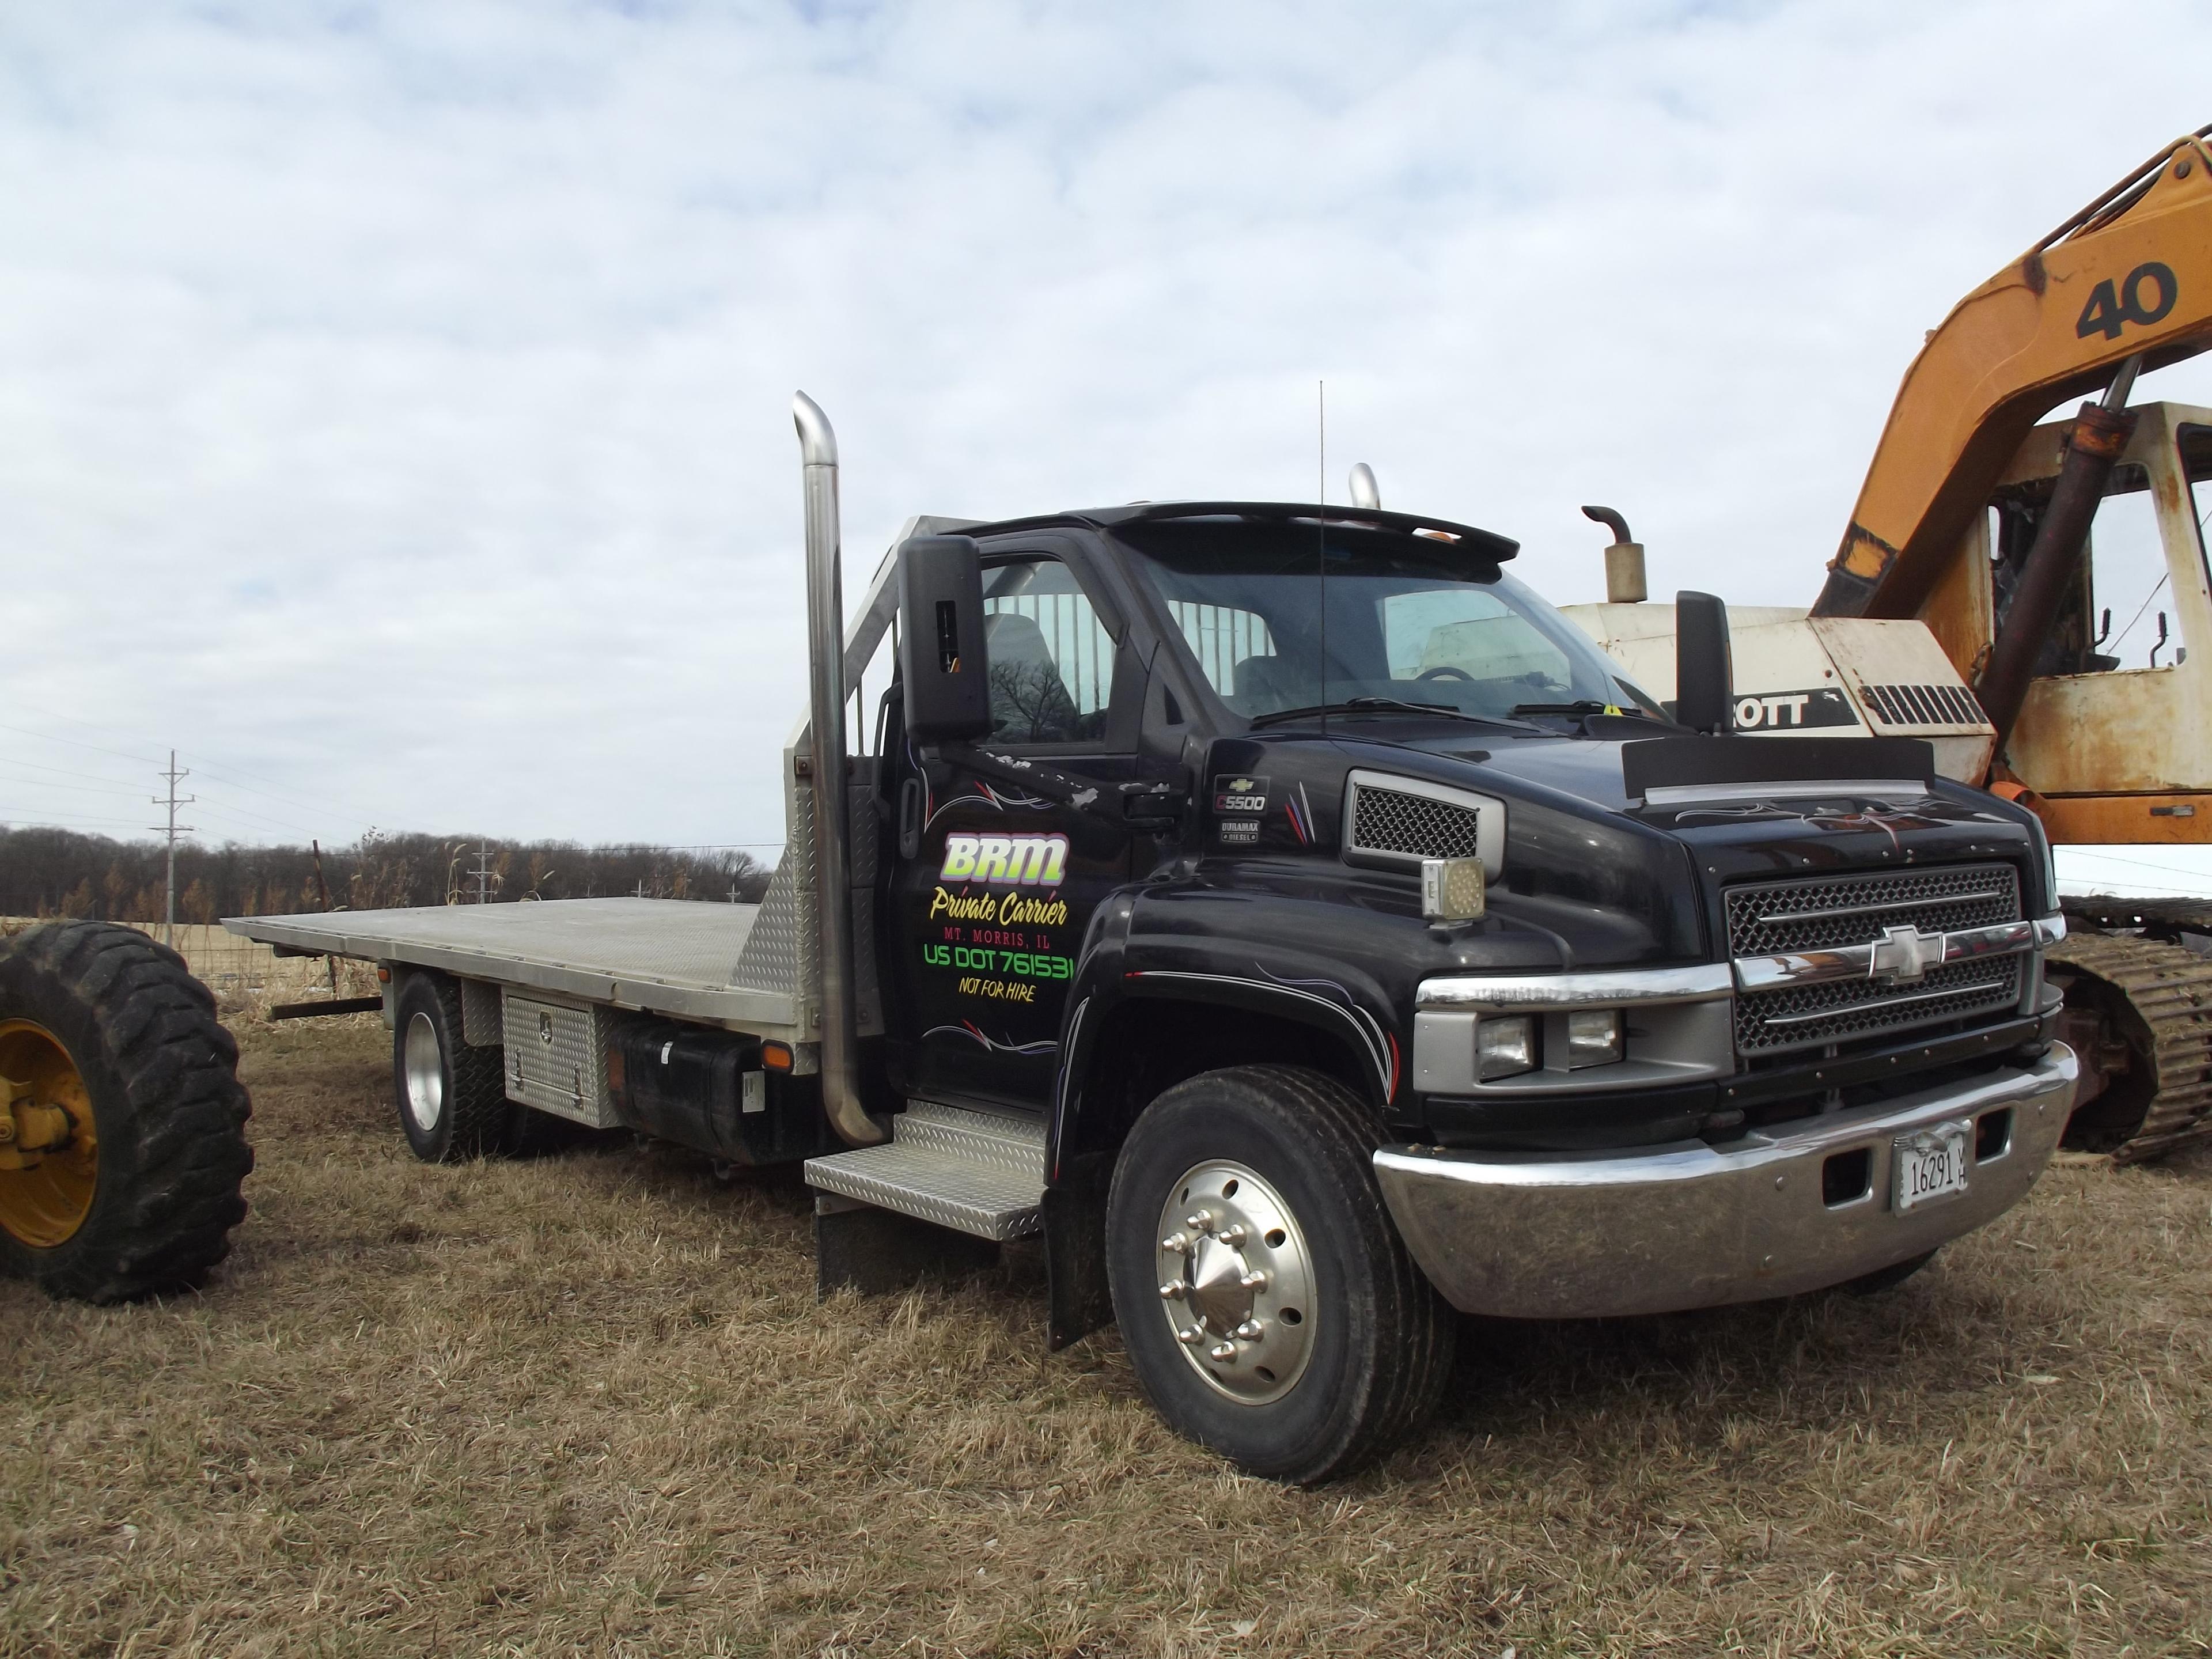 2003 Chevy C5500 Truck w/23' Flat Bed